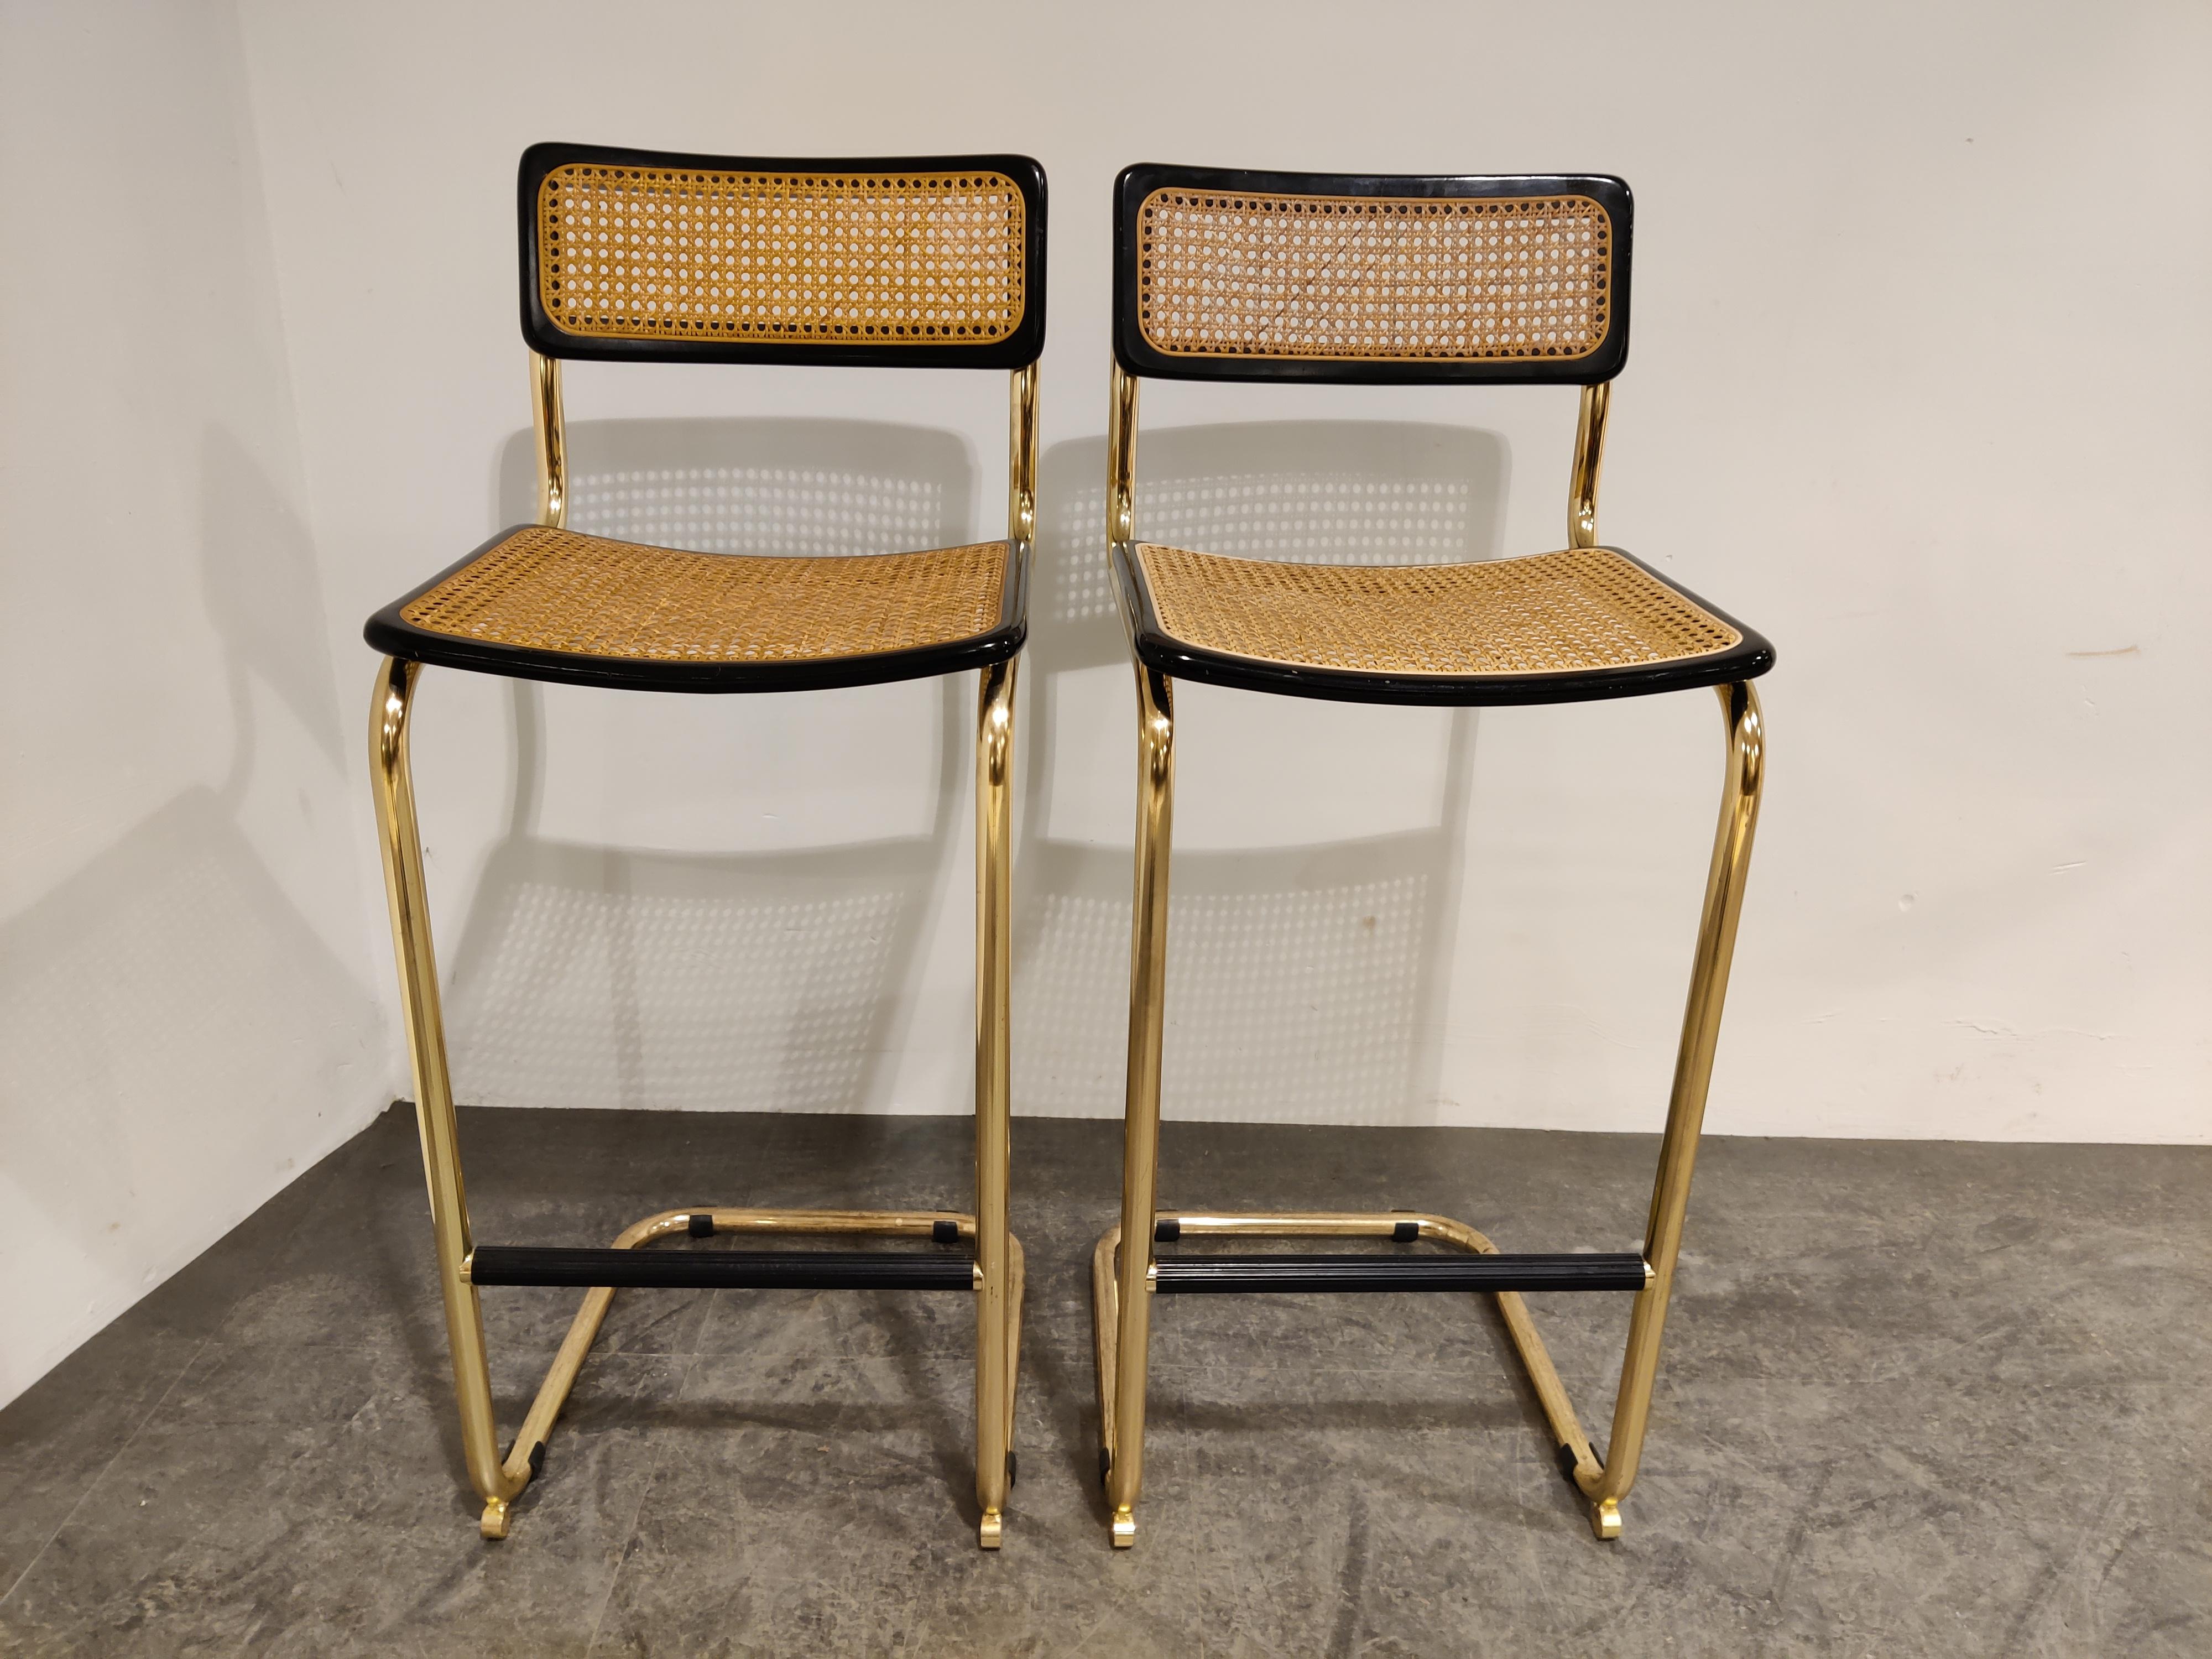 Set of 2 Marcel Breuer style Bauhaus design bar stools with brass frames.

Tubular brass frame with cane seats and black lacquered wood, labeled 'made in italy'

All in very good condition.

Protected foot rests.

Dimensions:
Height: